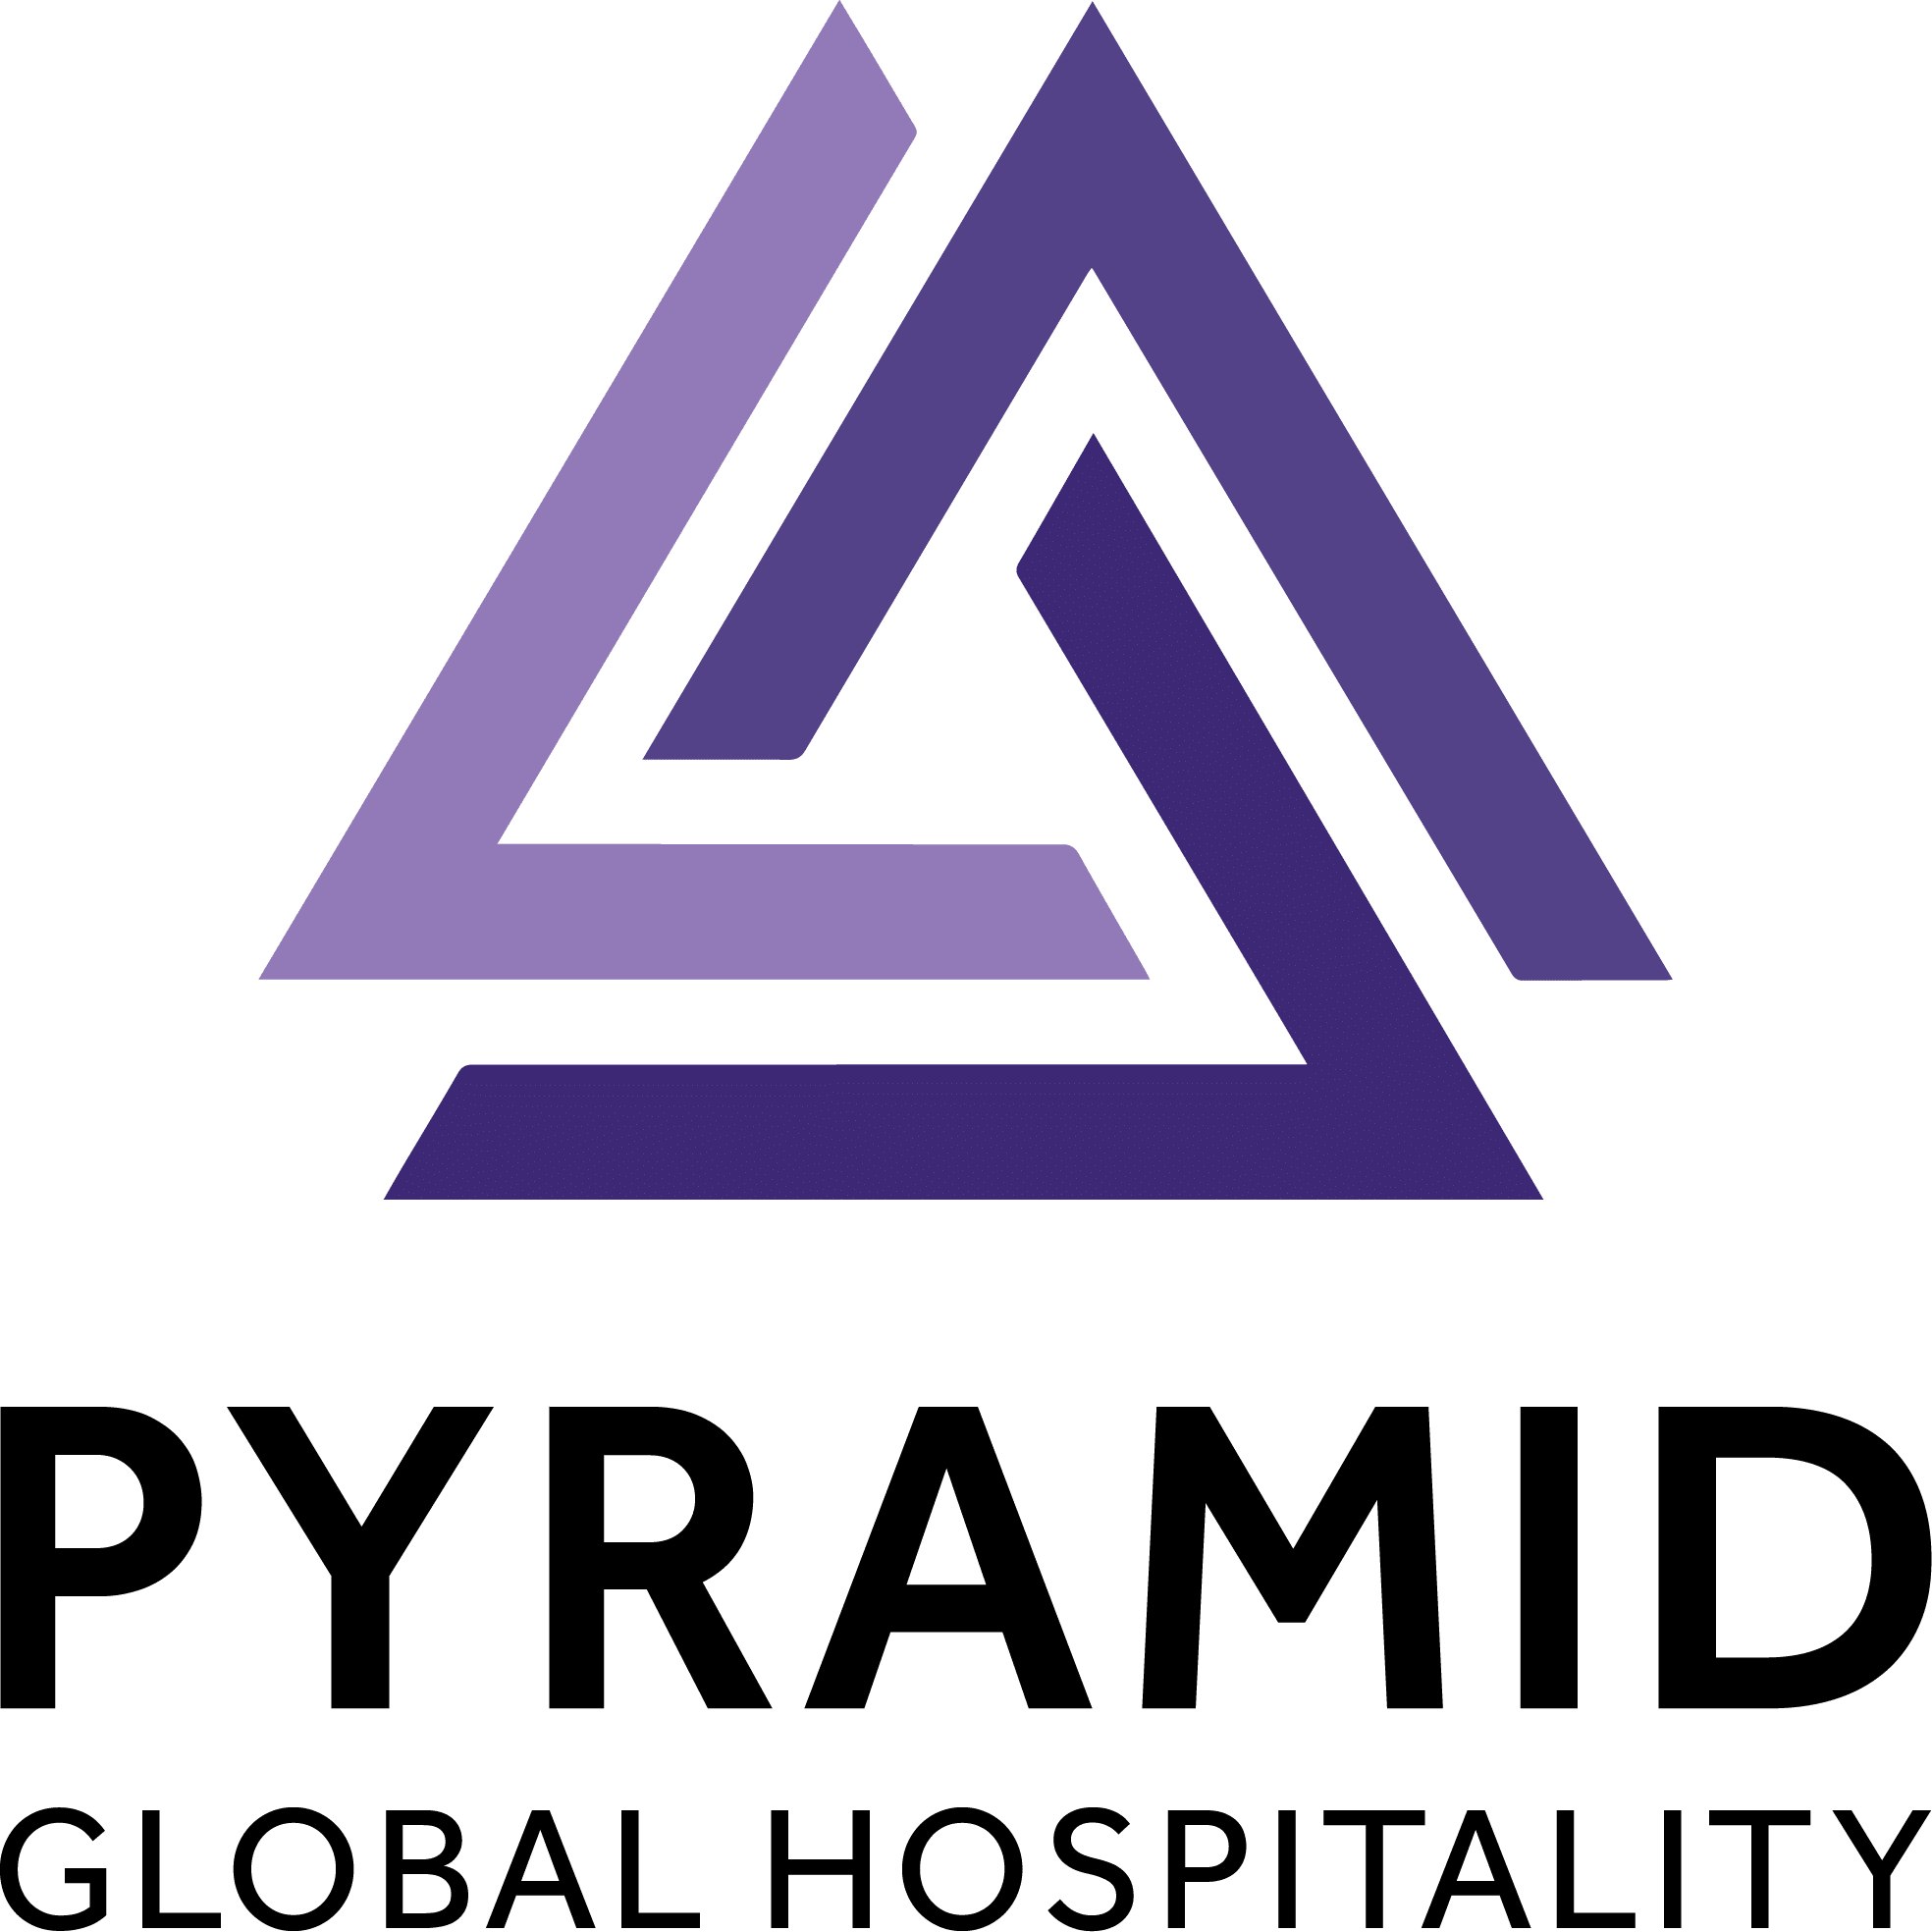 The image displays a logo featuring geometric shapes that form a stylized pyramid above the words "PYRAMID GLOBAL HOSPITALITY" in uppercase font, set against a solid background.